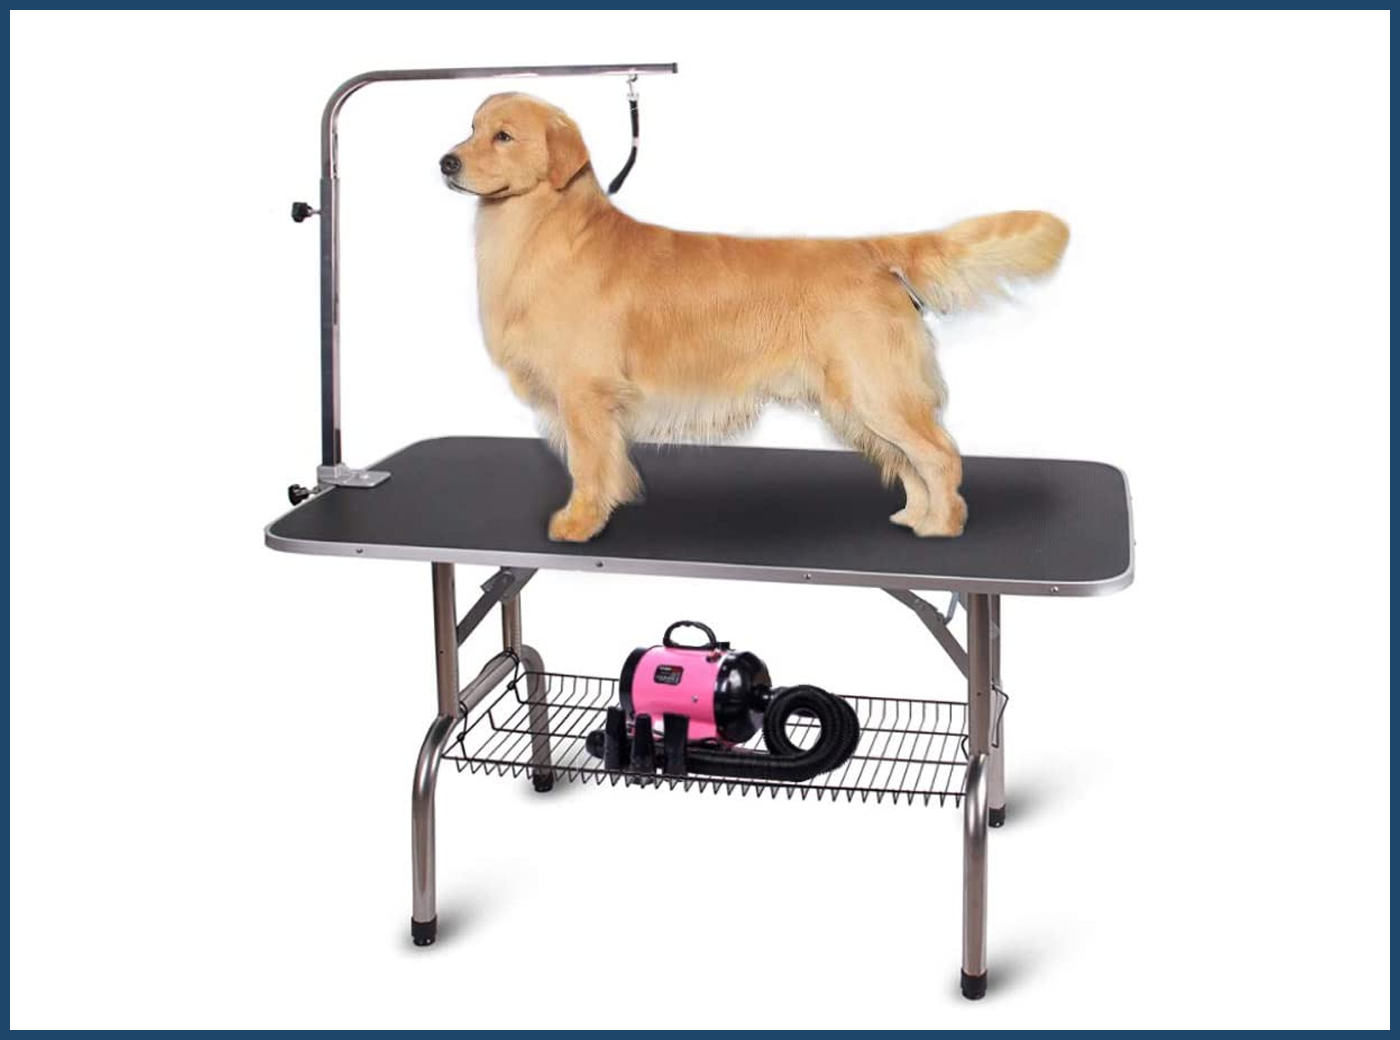 Foldable pet grooming table with adjustable stainless steel arms